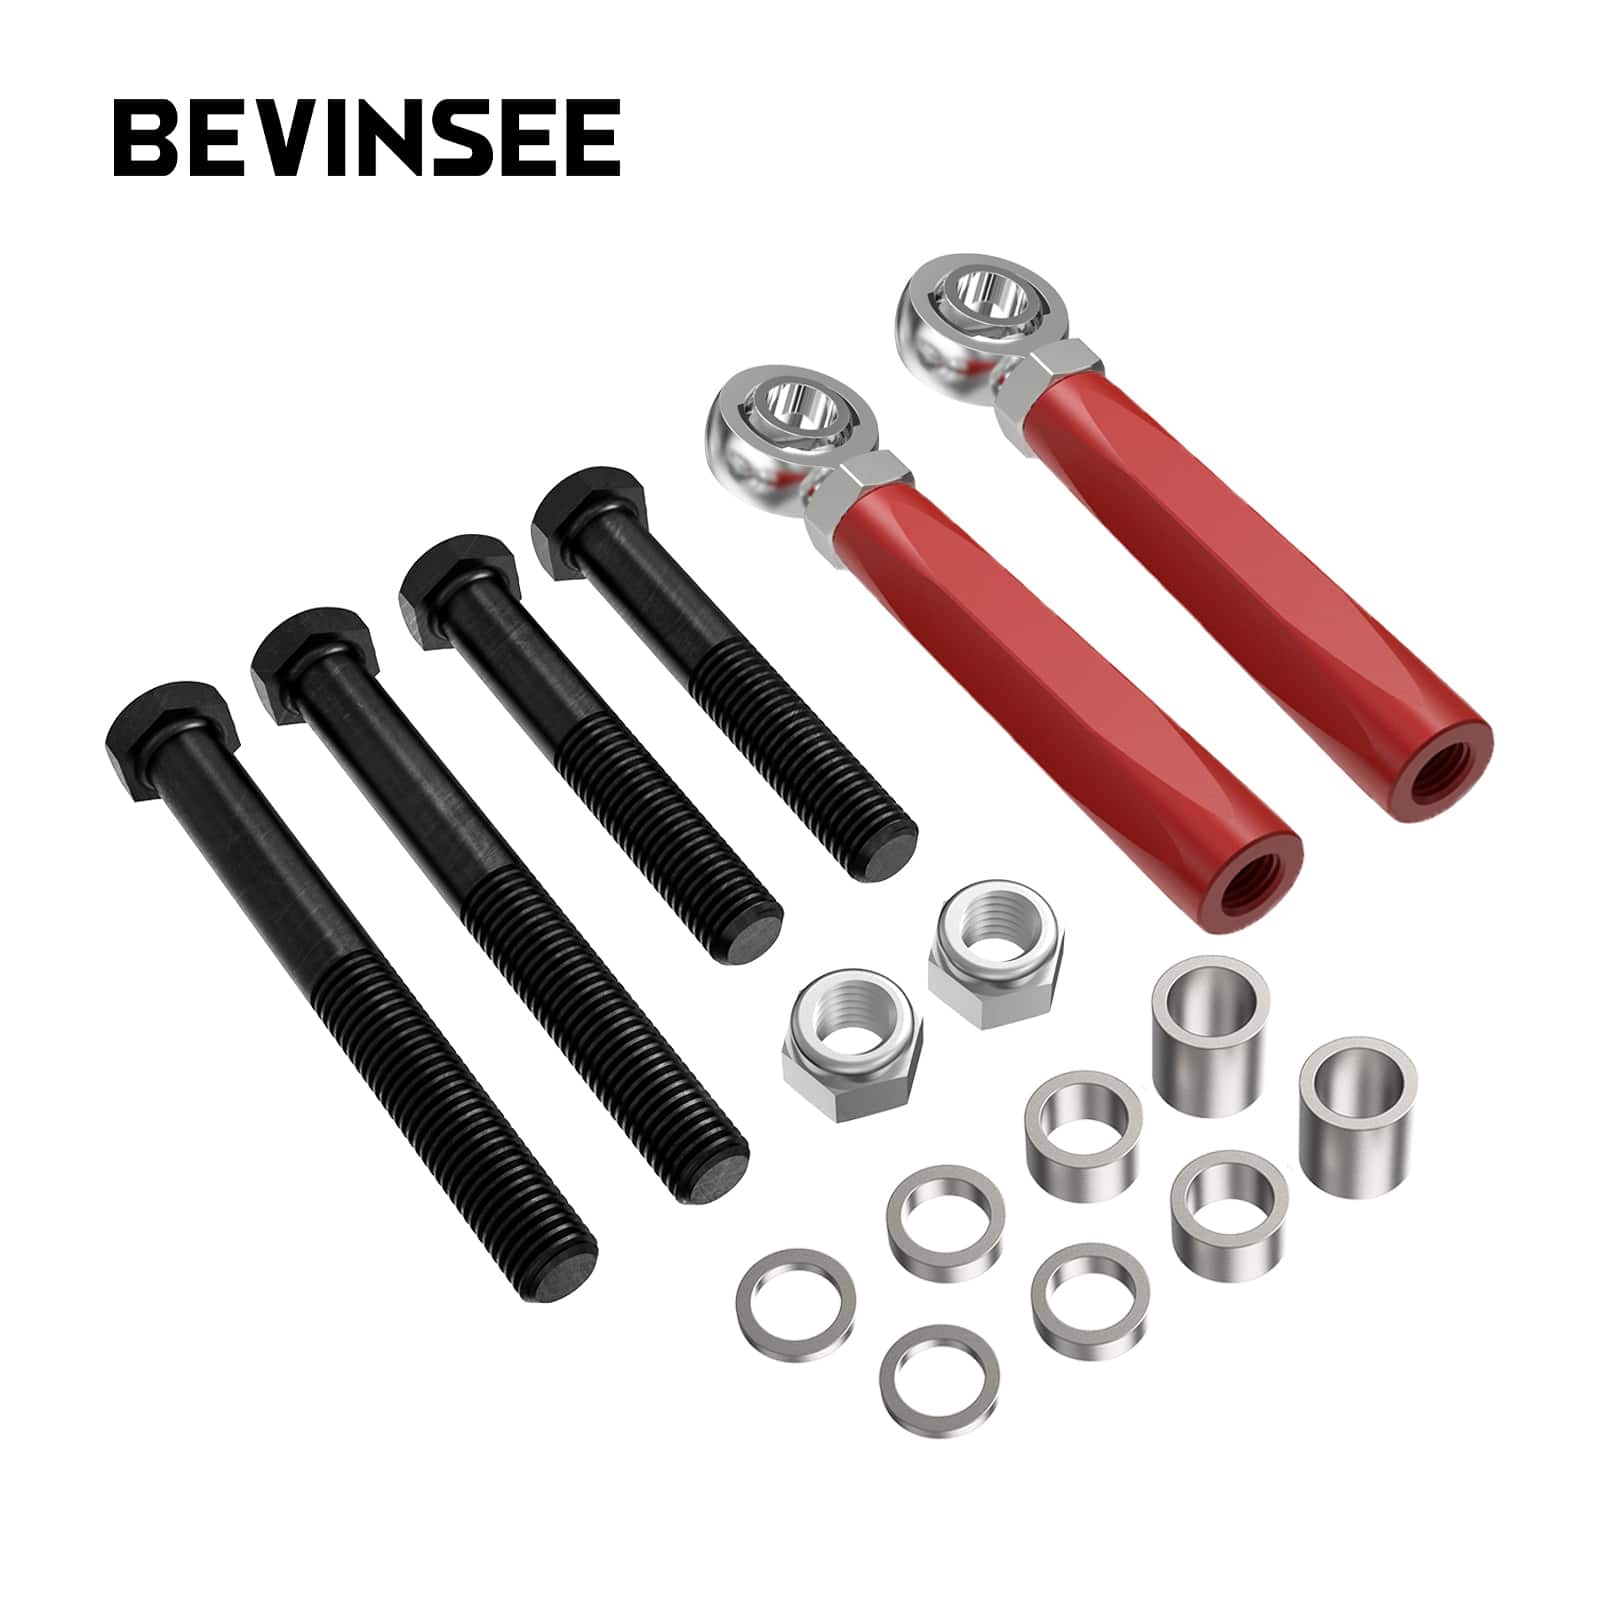 Adjustable Outer Tie-rod Ends For Maximum Power Bump Steer Kit For Ford Mustang GT V8 Roush & Saleen Vehicles